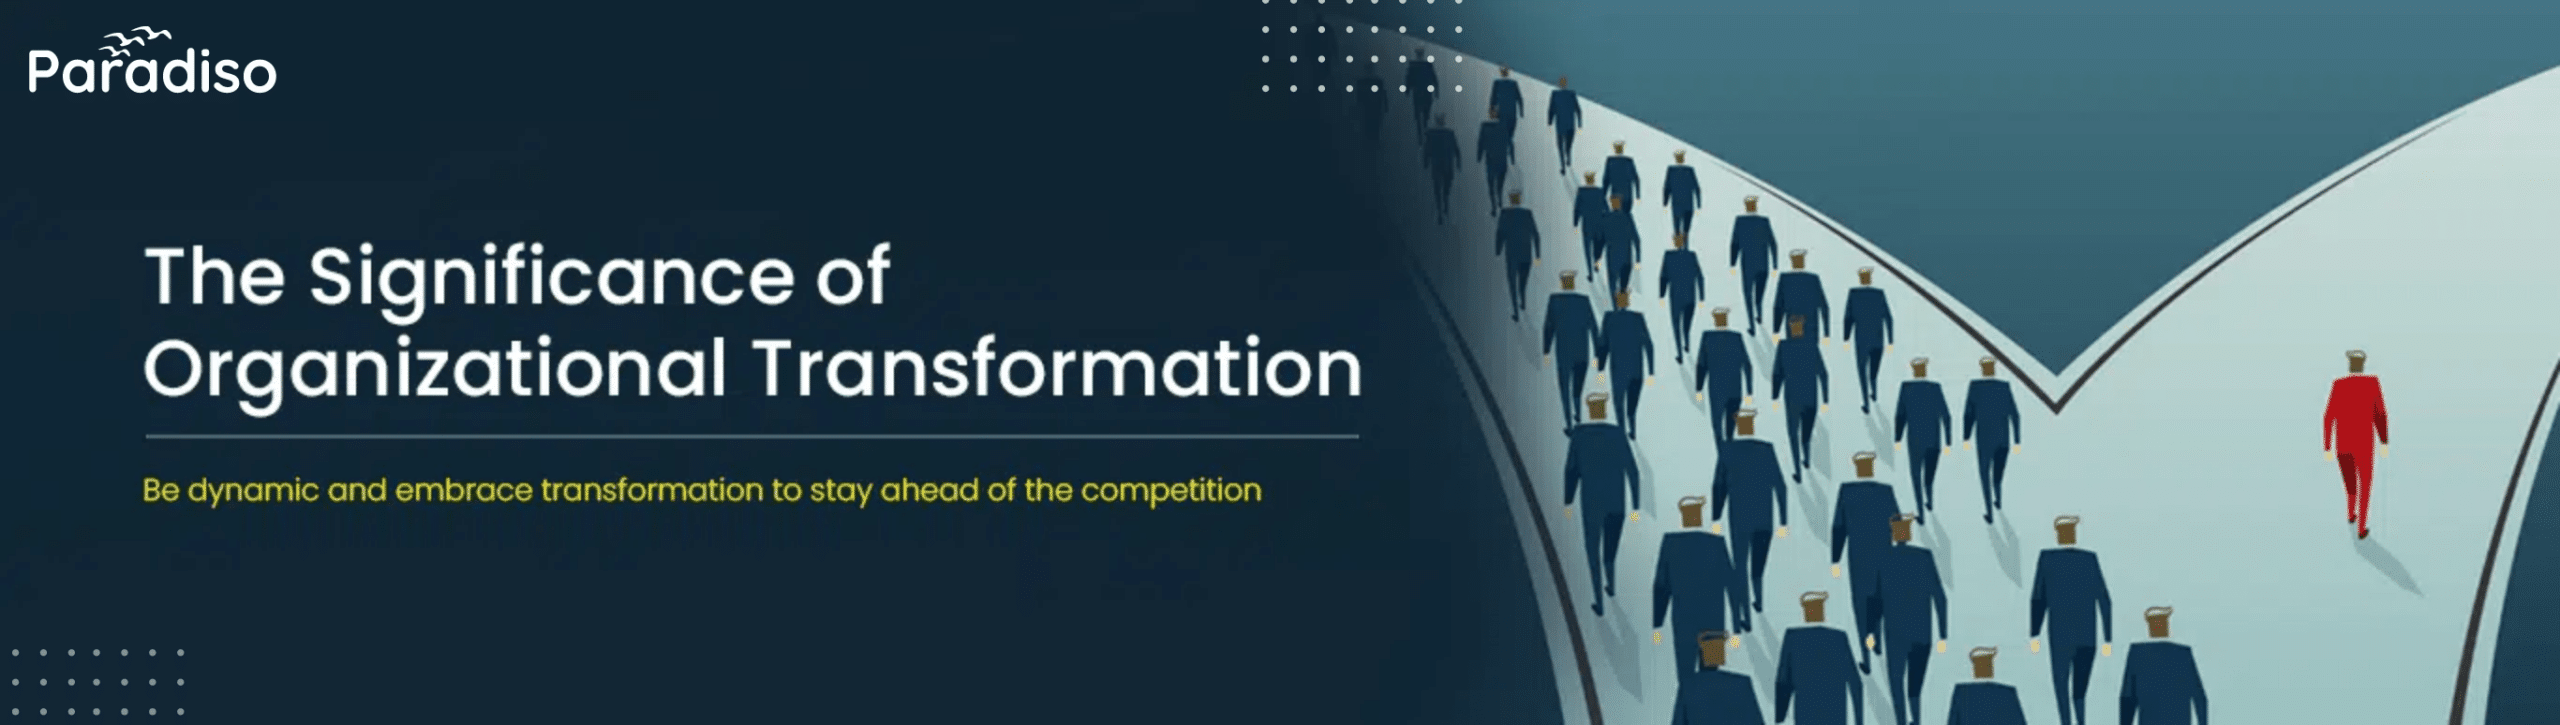 The Significance of Organizational Transformation